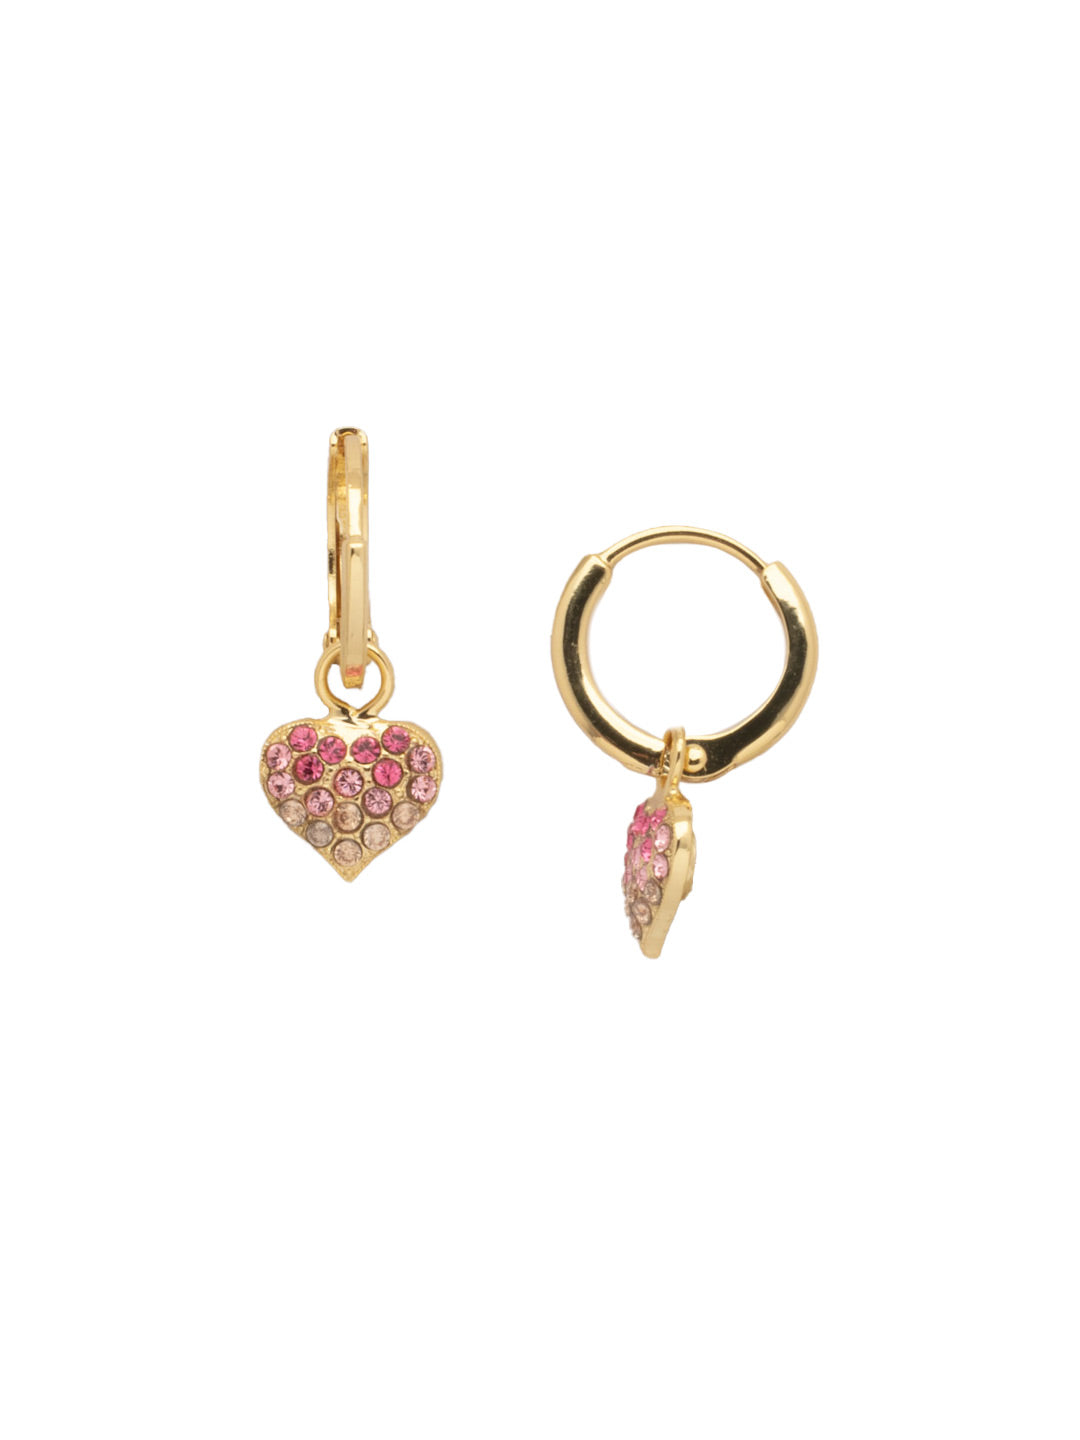 Mini Pave Heart Huggie Hoop Earrings - EFN2BGBFL - <p>The Mini Pave Heart Huggie Hoop Earrings feature a removable crystal-embellished heart charm on a small huggie hoop. From Sorrelli's Big Flirt collection in our Bright Gold-tone finish.</p>